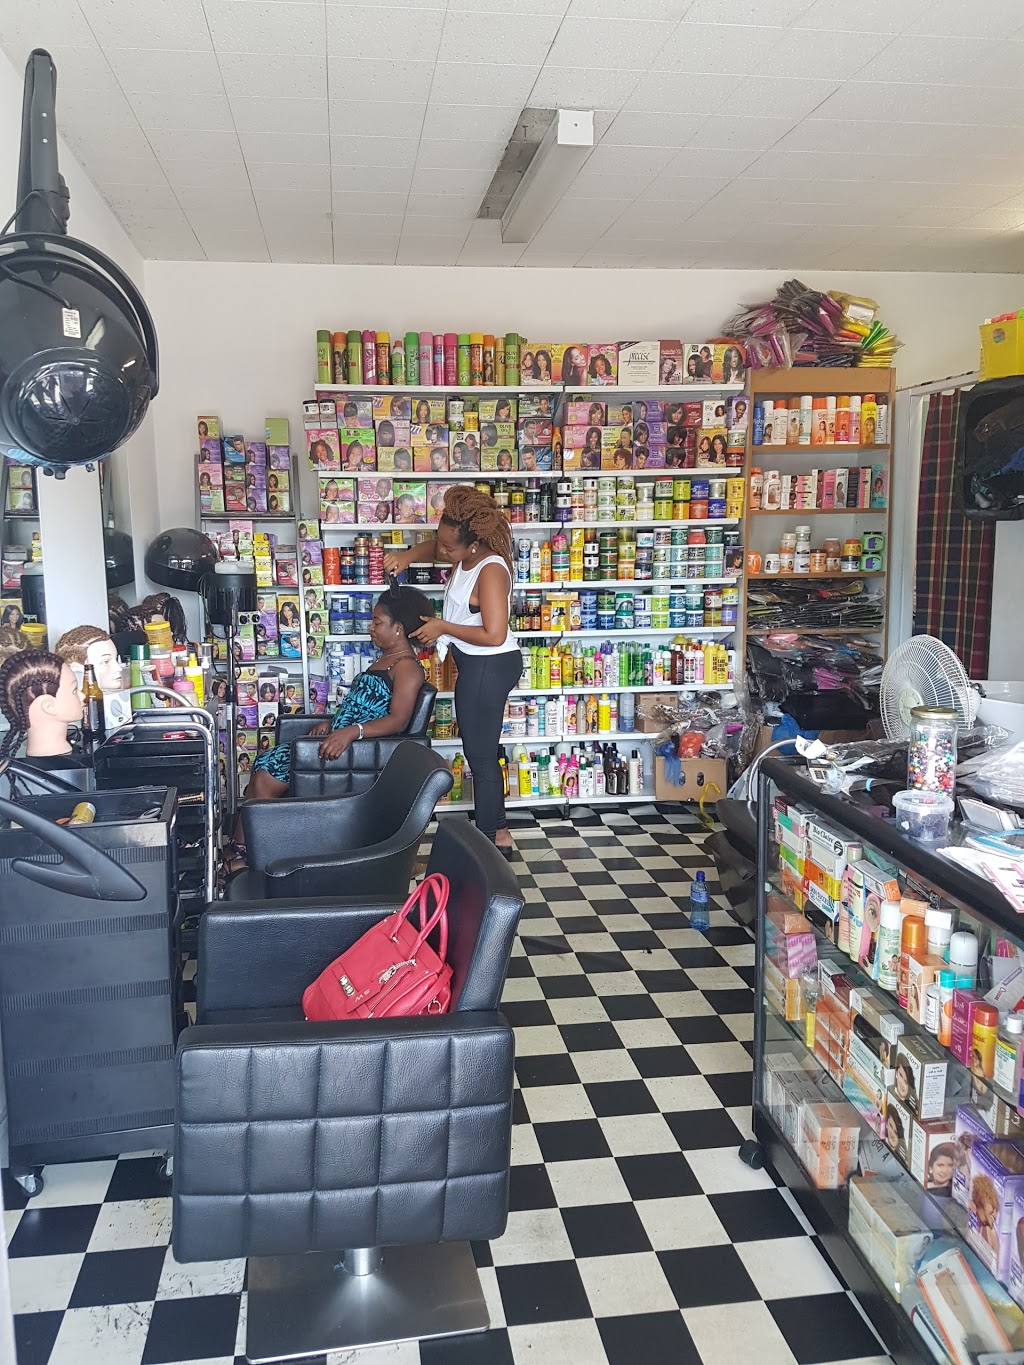 African Salon | store | 2 Enmore Rd, Newtown NSW 2042, Australia | 0295572577 OR +61 2 9557 2577